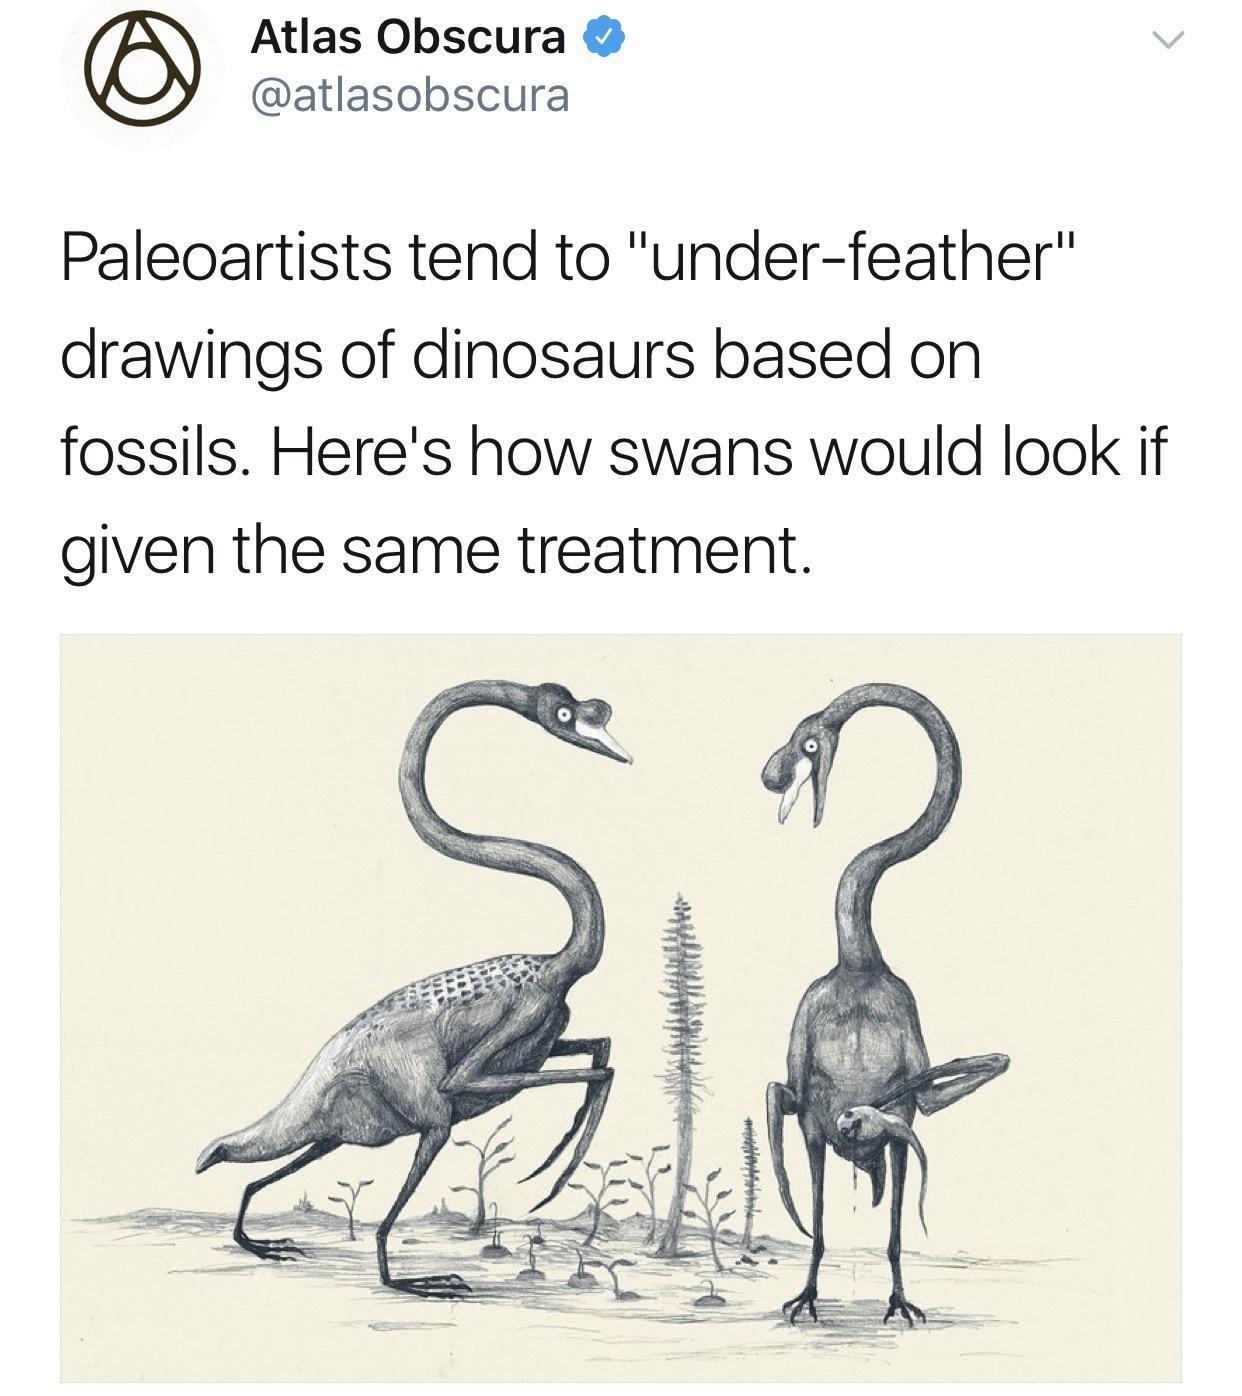 cool pics and memes - dinosaurs under feathered - Atlas Obscura Paleoartists tend to "underfeather" drawings of dinosaurs based on fossils. Here's how swans would look if given the same treatment. S